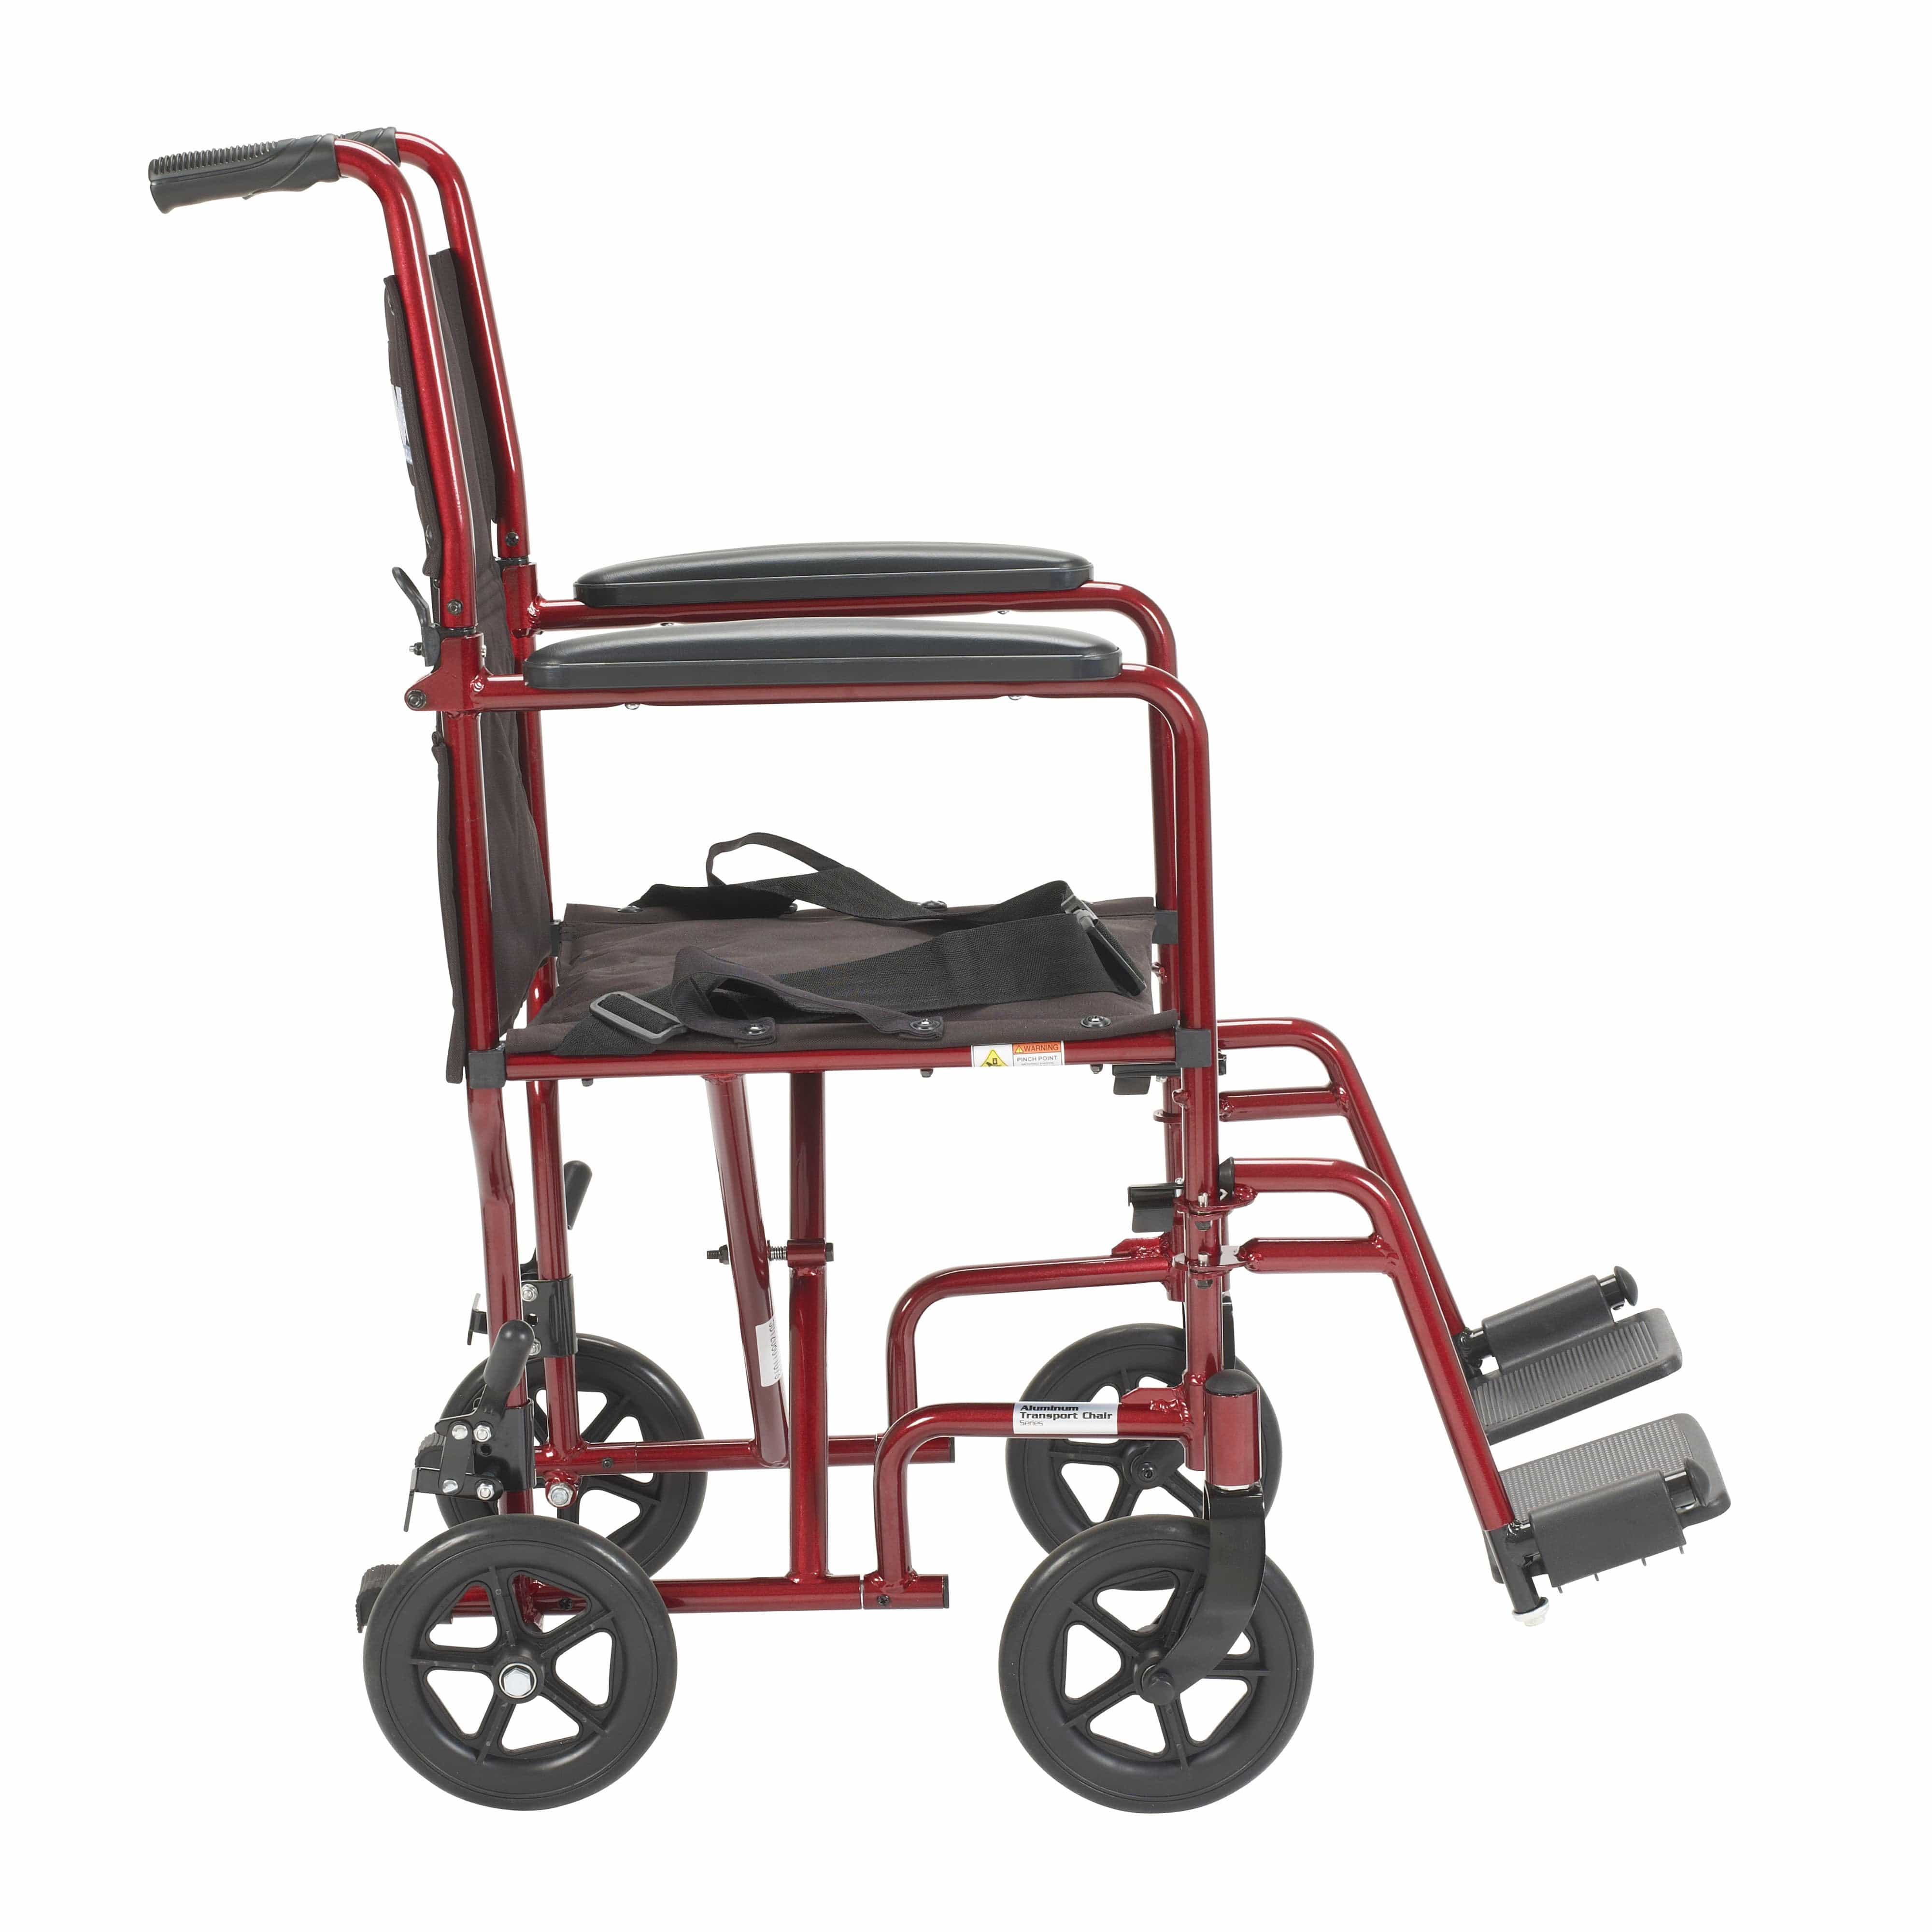 Complete Medical Wheelchairs & Accessories Drive Medical Wheelchair Transport Lightweight Red 19